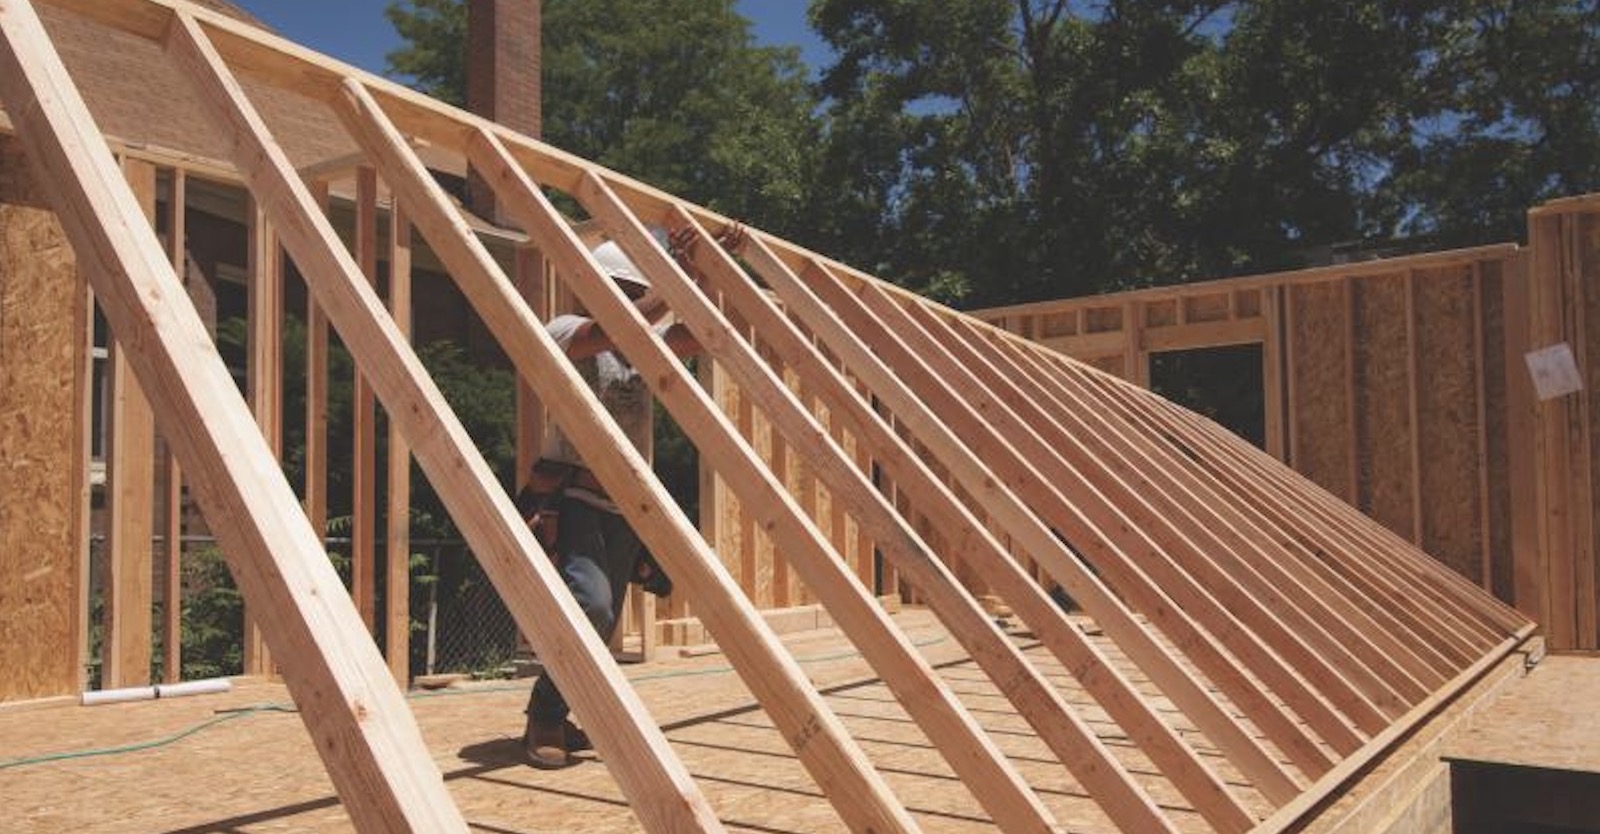 BMC's Ready-Frame pre-cut package saves time and money during house framing